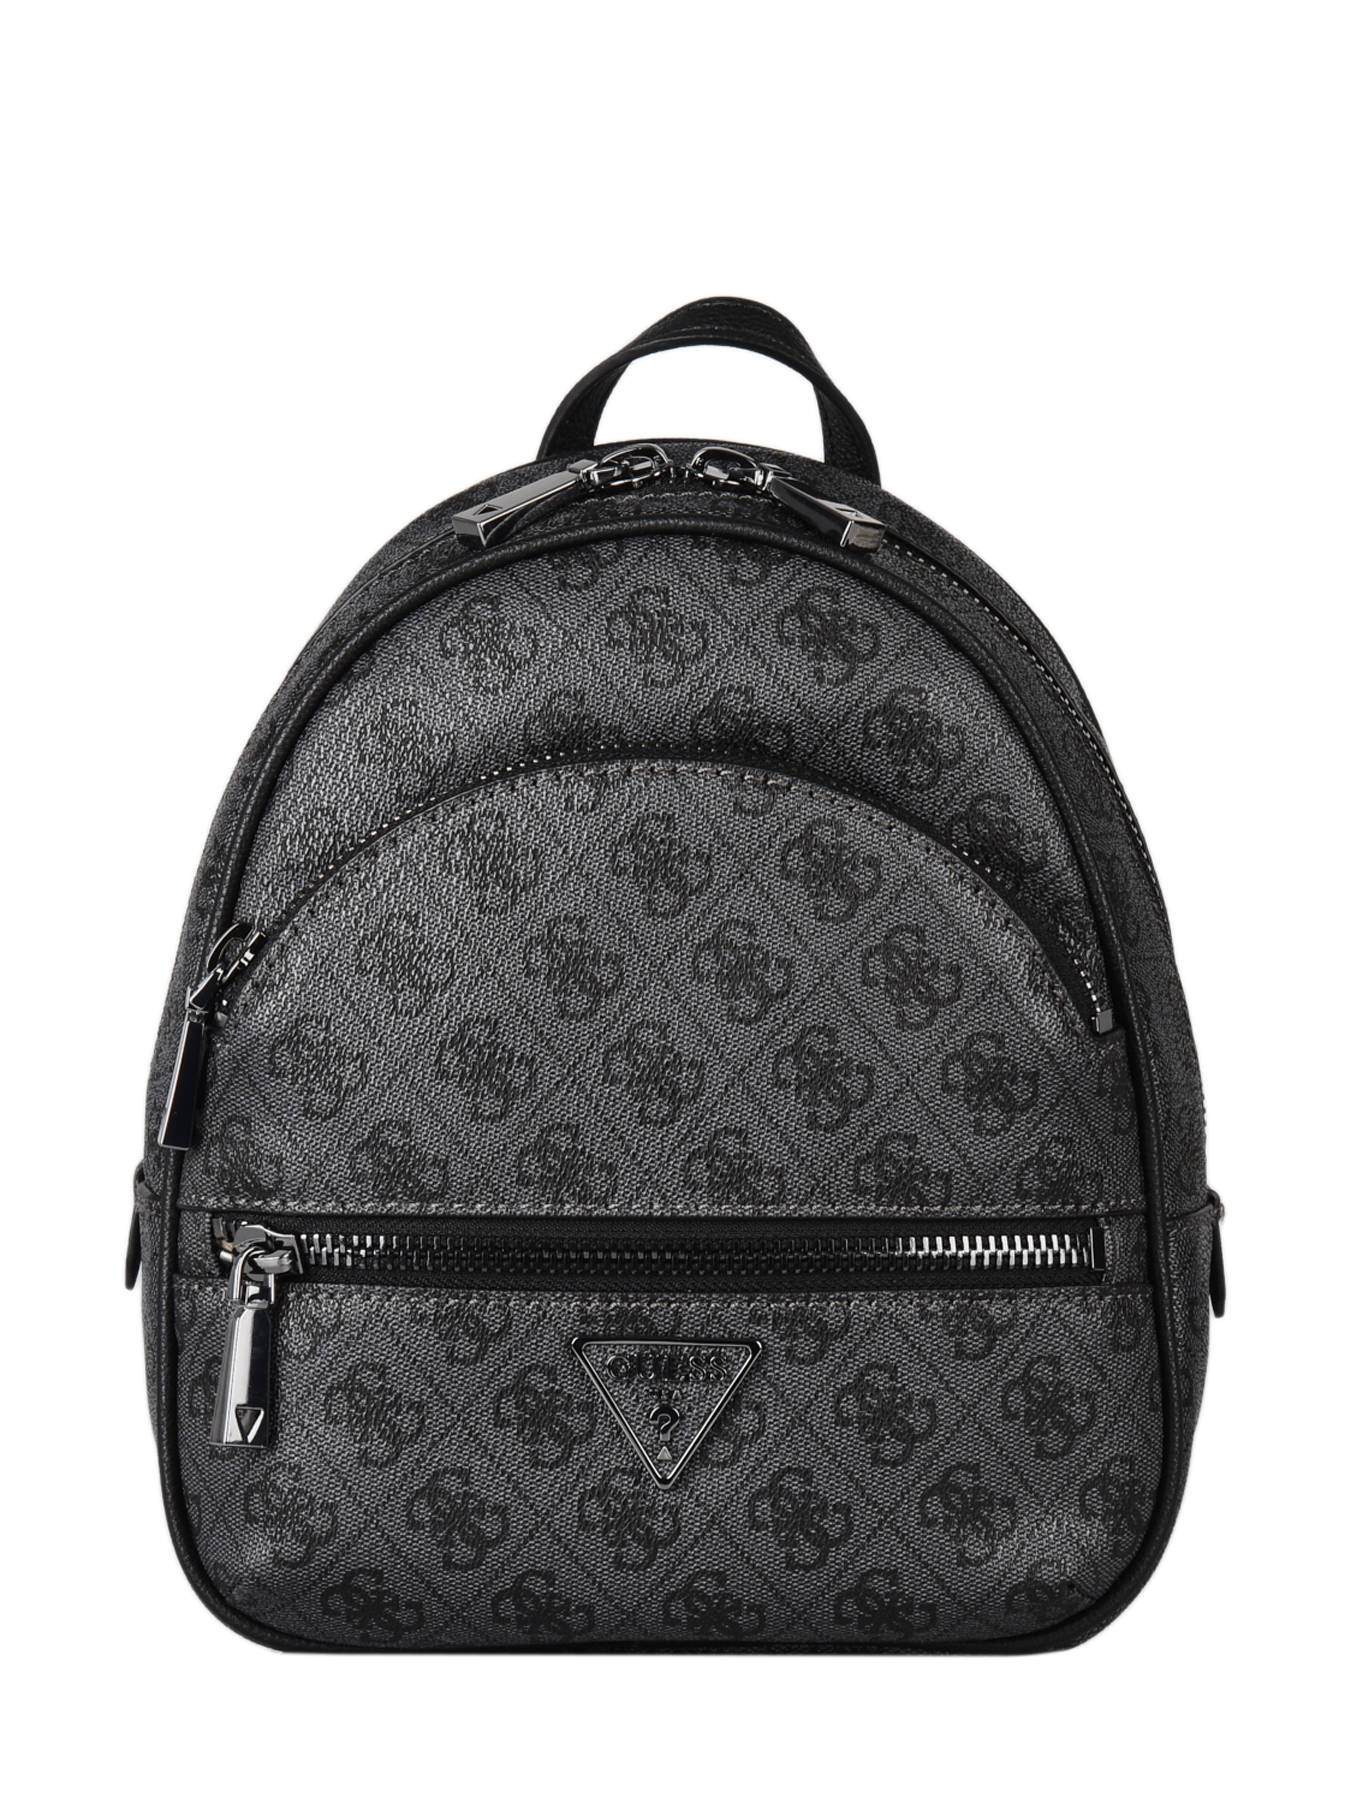 Guess Backpack HWSM.6994320 - best prices